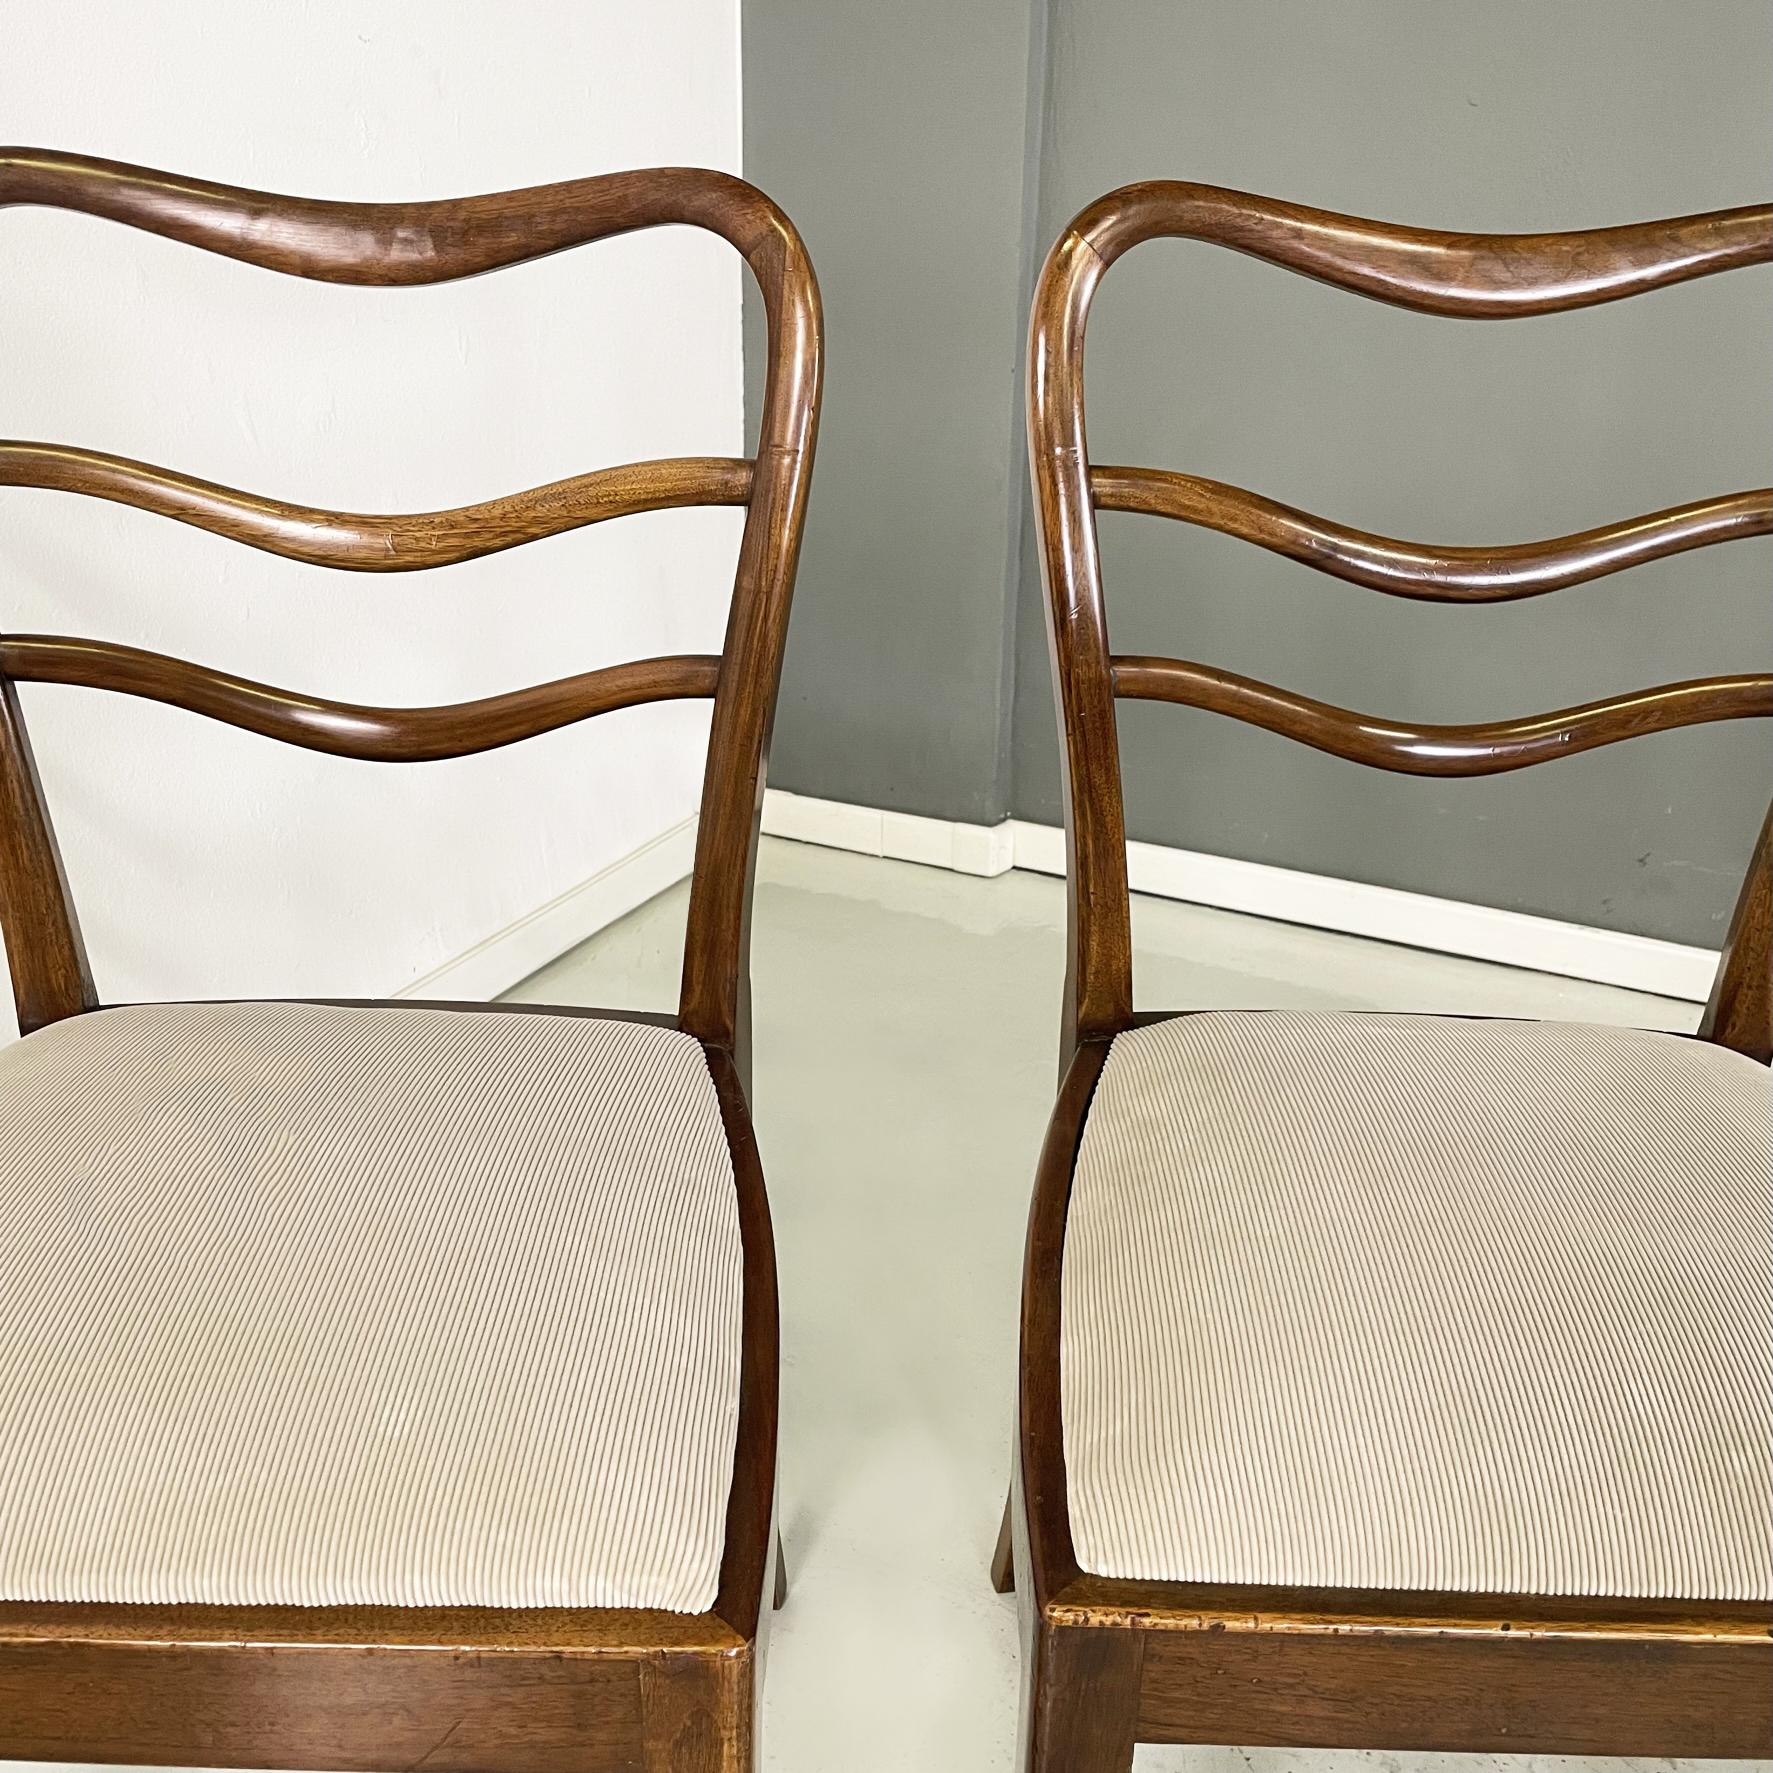 Hungary Art Deco Chairs in wood and beige corduroy velvet, 1930s For Sale 1